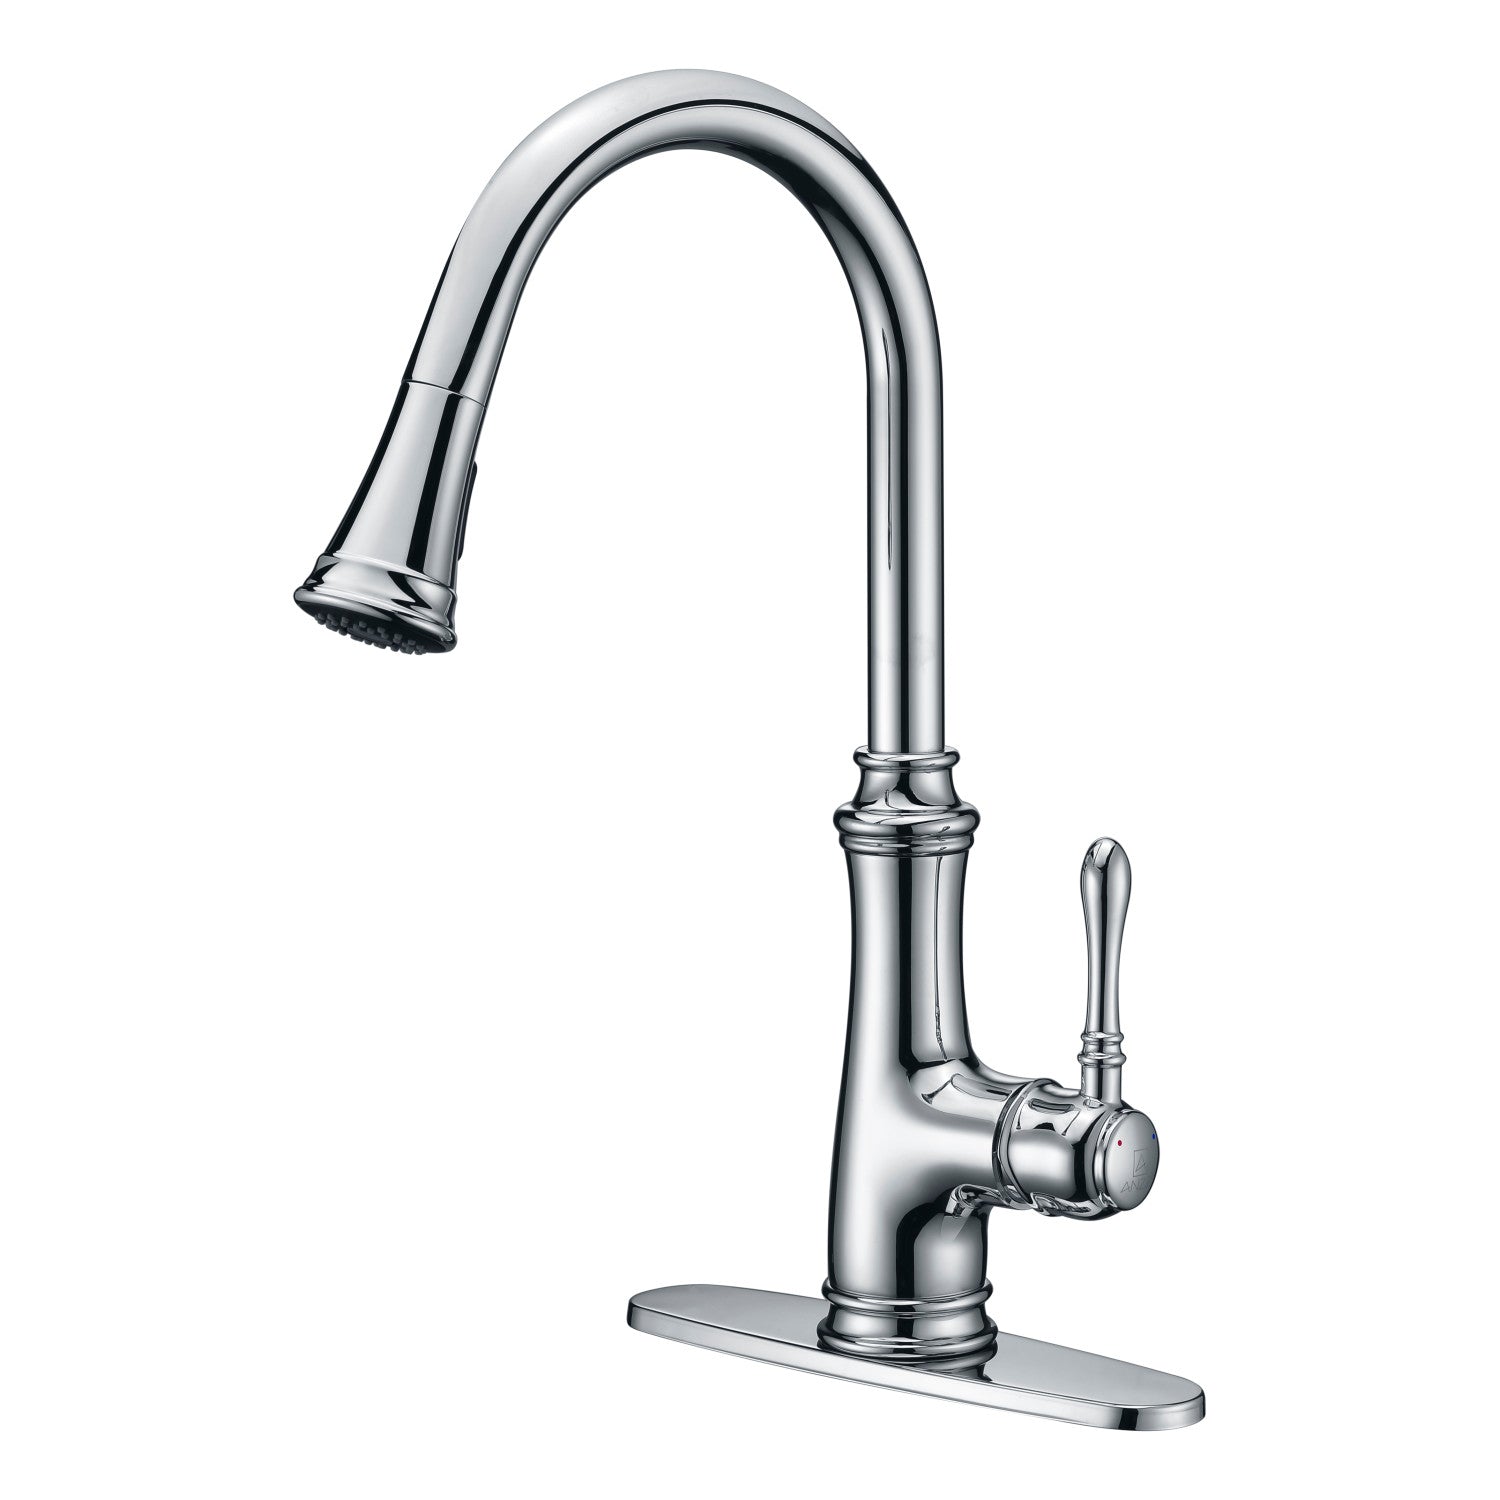 ANZZI Luna Series Single Hole Polished Chrome Kitchen Faucet With Euro-Grip Pull Down Sprayer